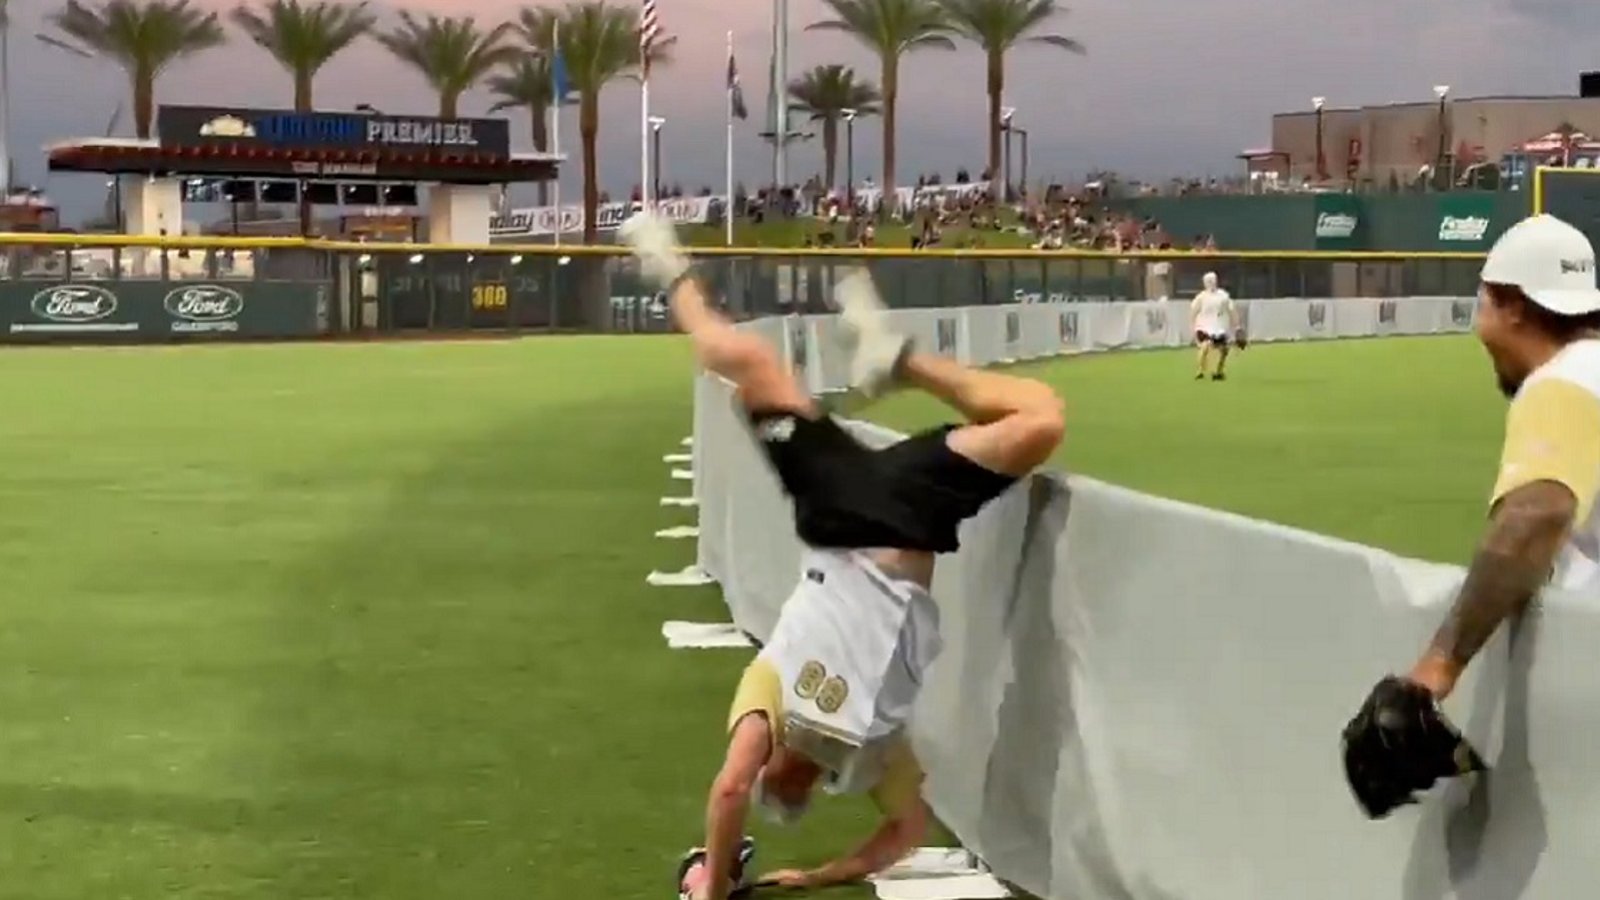 Nate Schmidt makes an unbelievable circus catch over the fence.